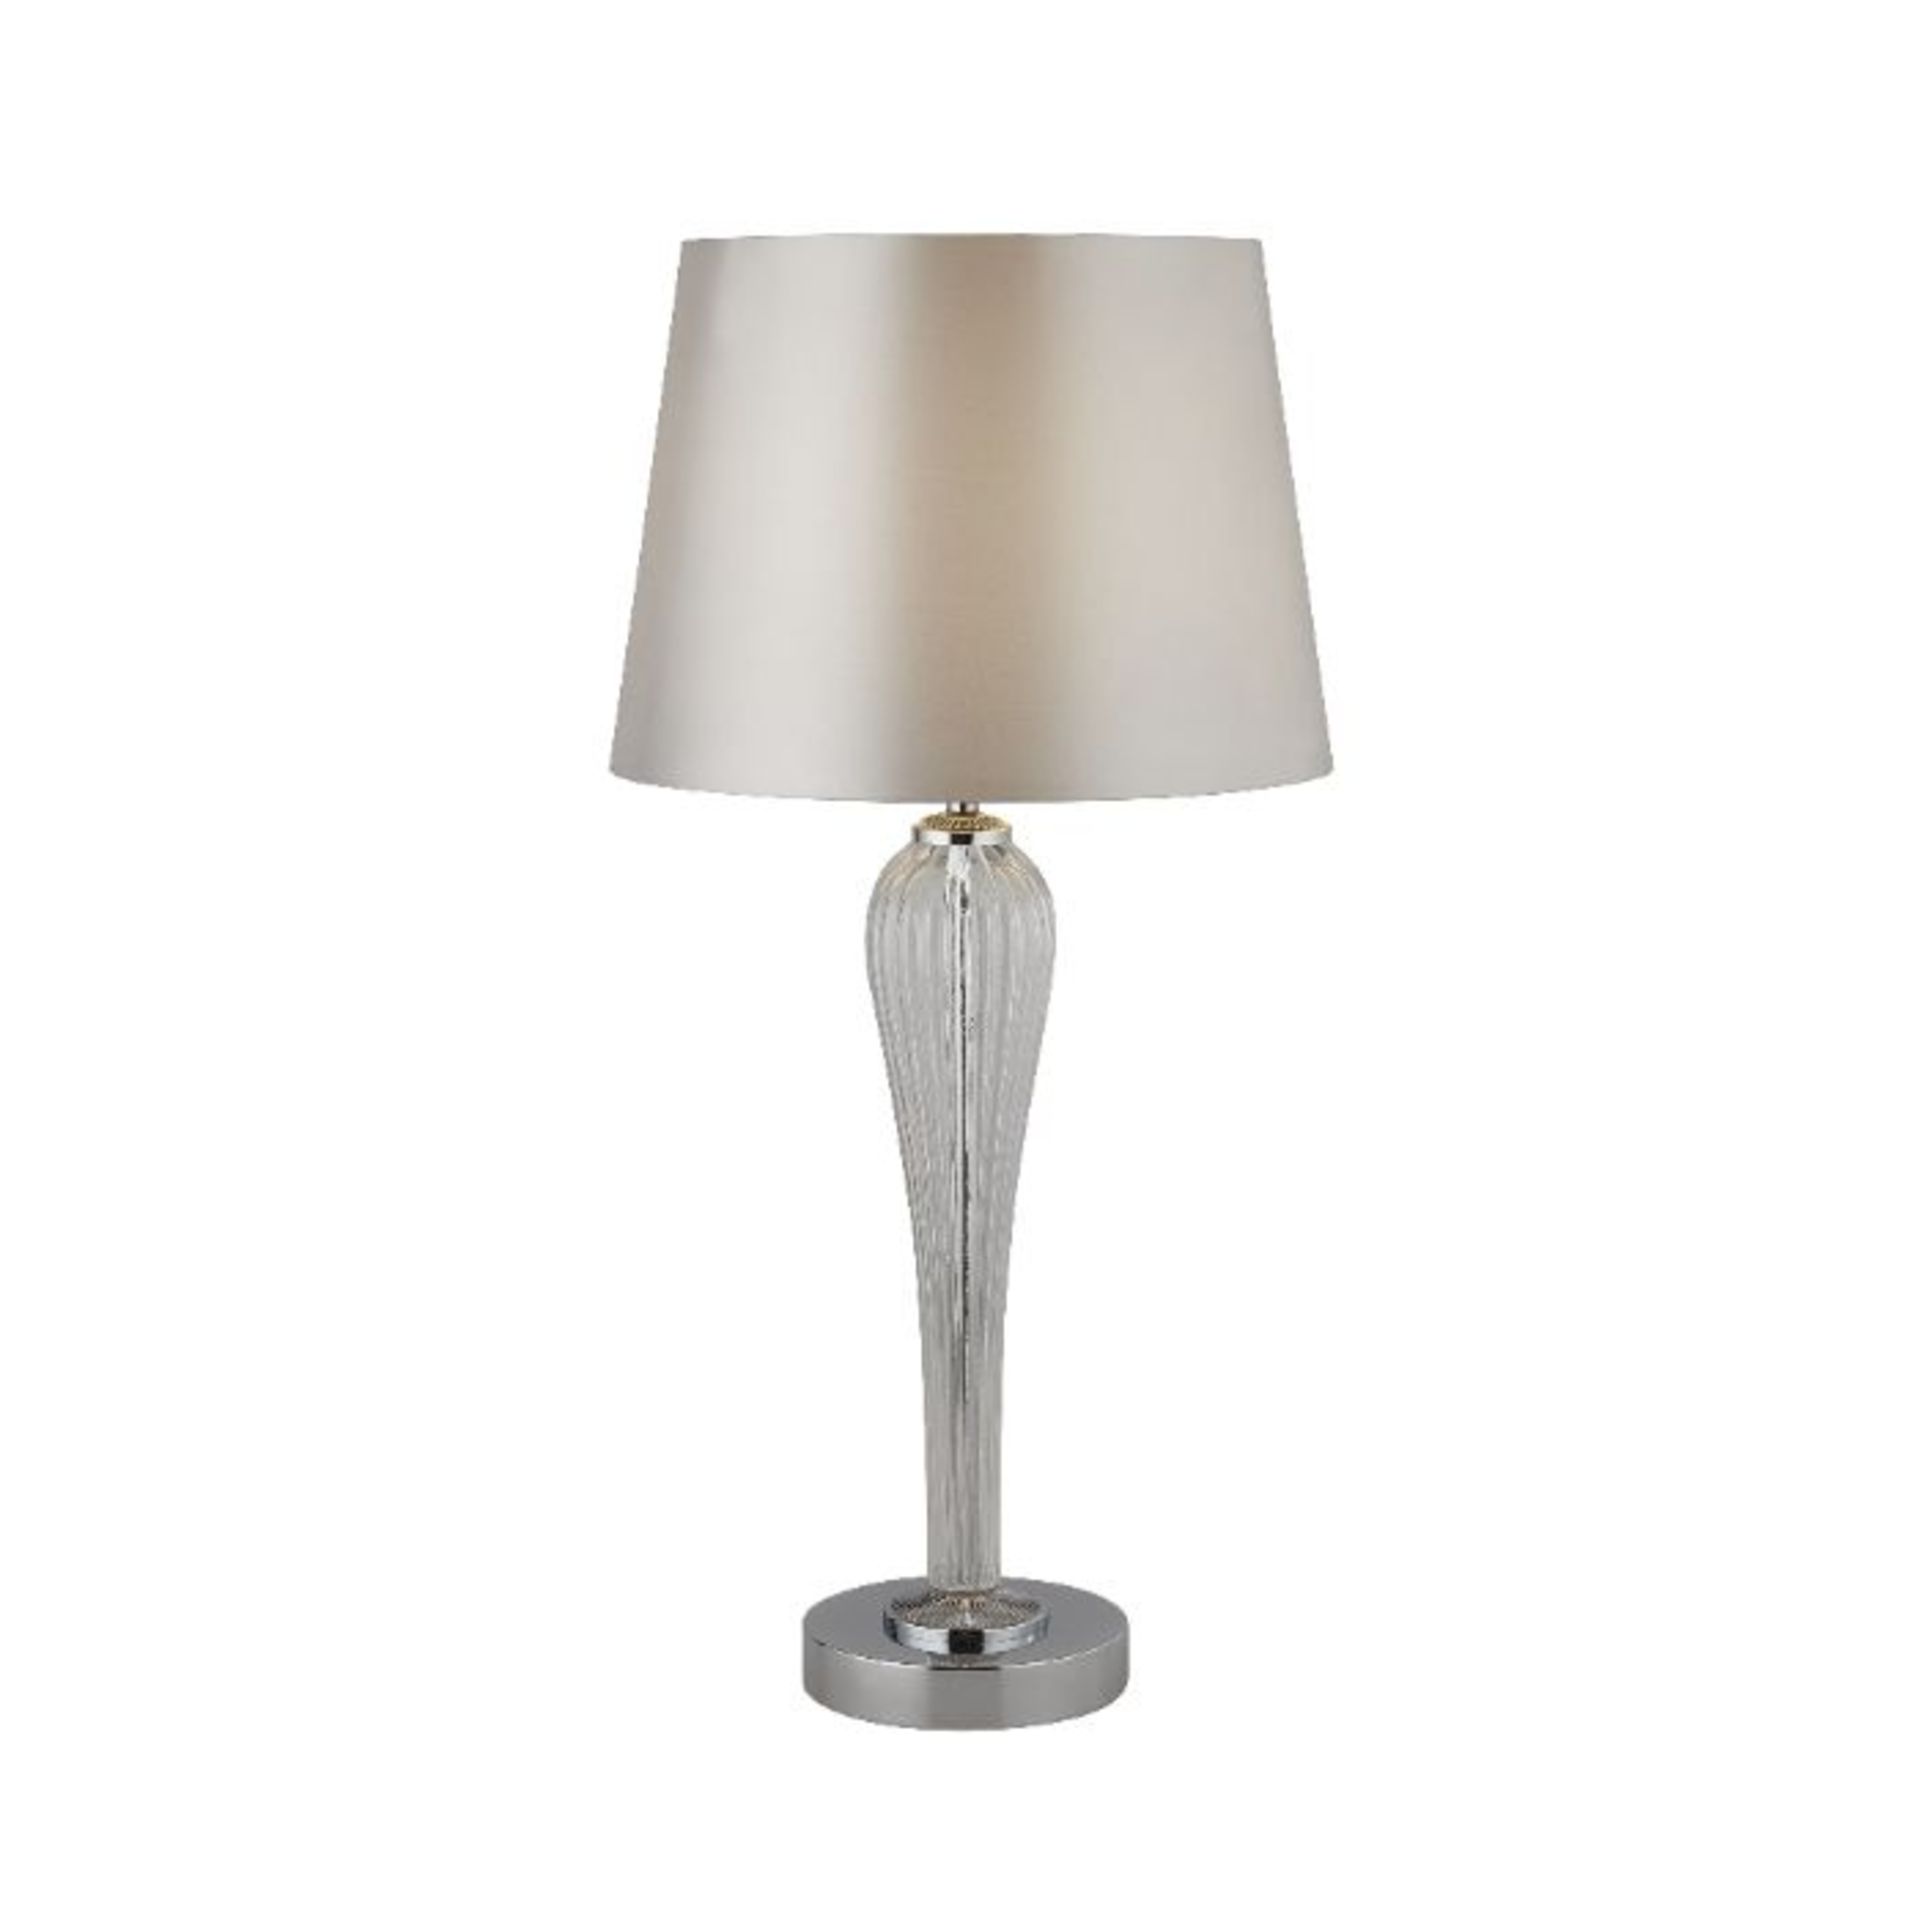 BRAND NEW - ART DECO STYLE TABLE LAMP (GLASS BASE, SILVER FABRIC SHADE 56CM H. 20CM D. 60W) High ta